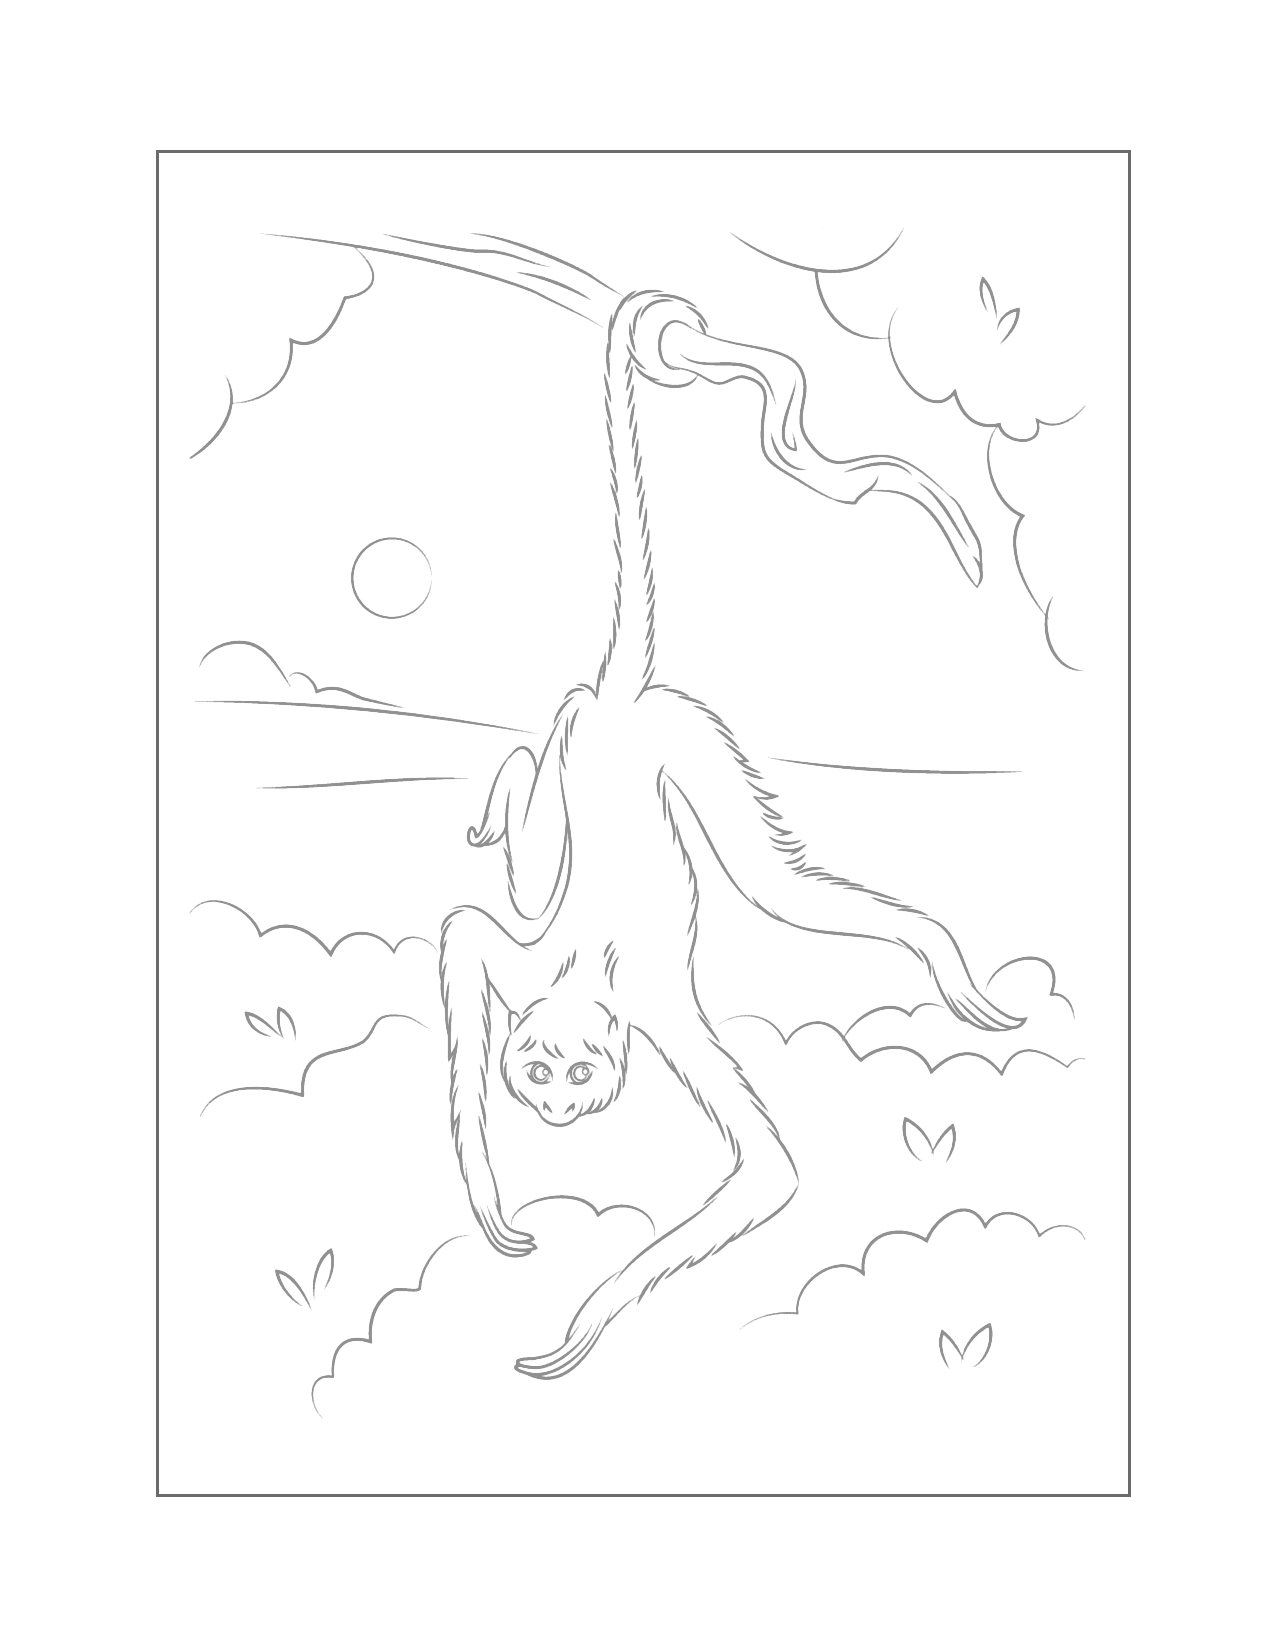 Monkey Hanging From Tree Traceable Coloring Page